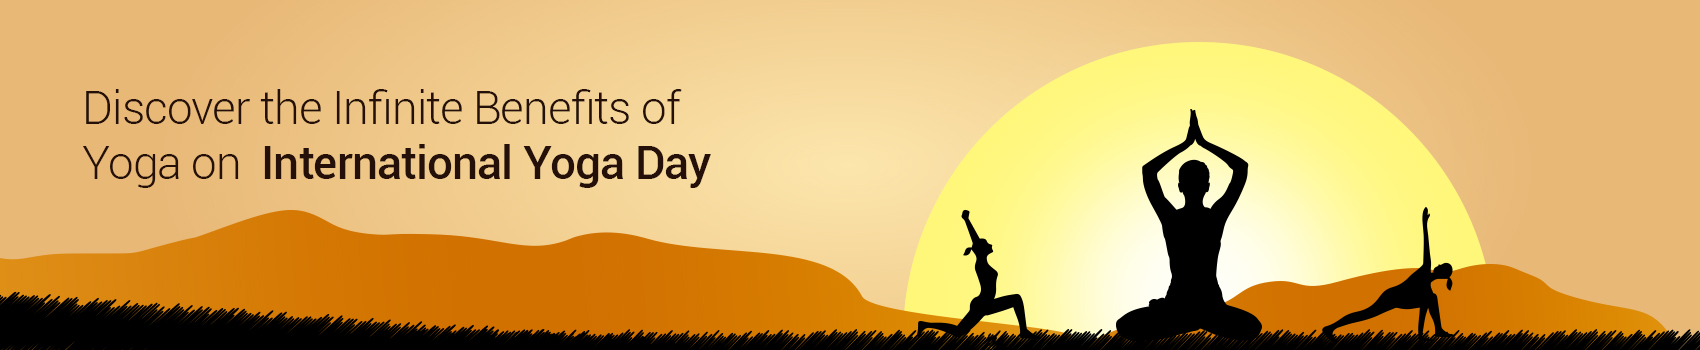 Discover the Benefits of Yoga on International Yoga Day